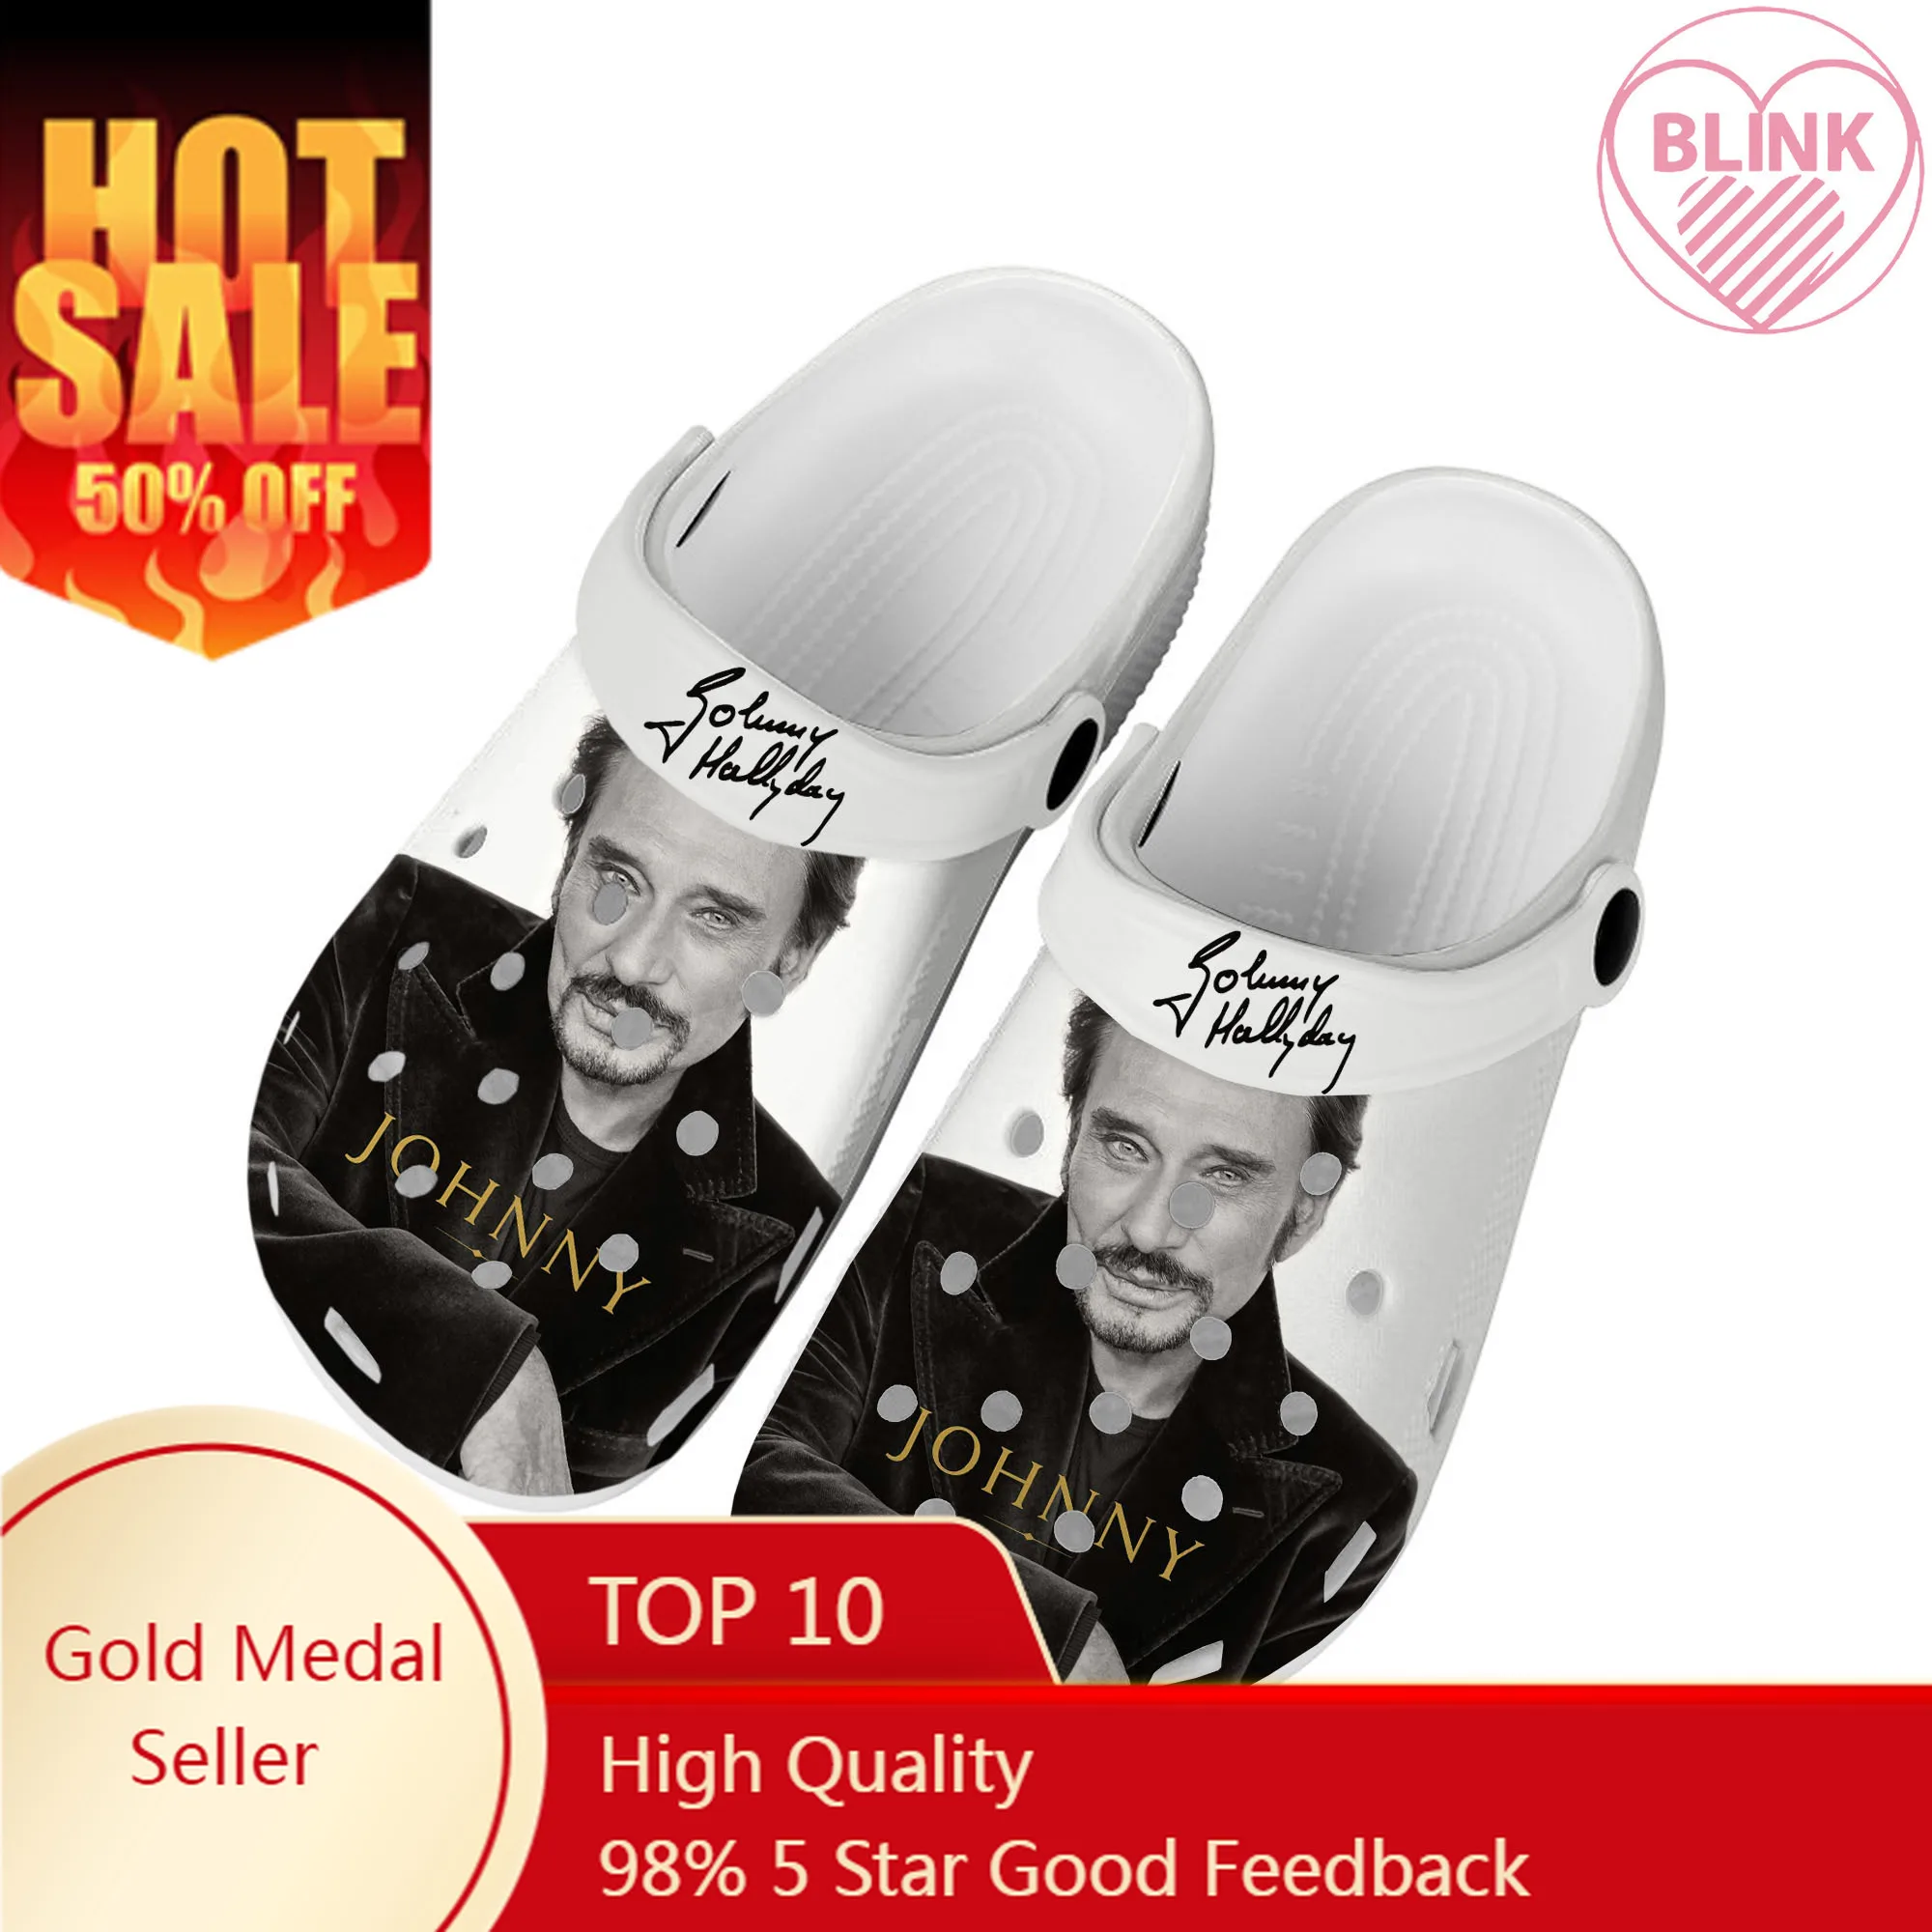 

Johnny Hallyday Rock Singer Home Clogs Custom Water Shoes Mens Womens Teenager Shoe Garden Clog Sandals Beach Hole Slippers